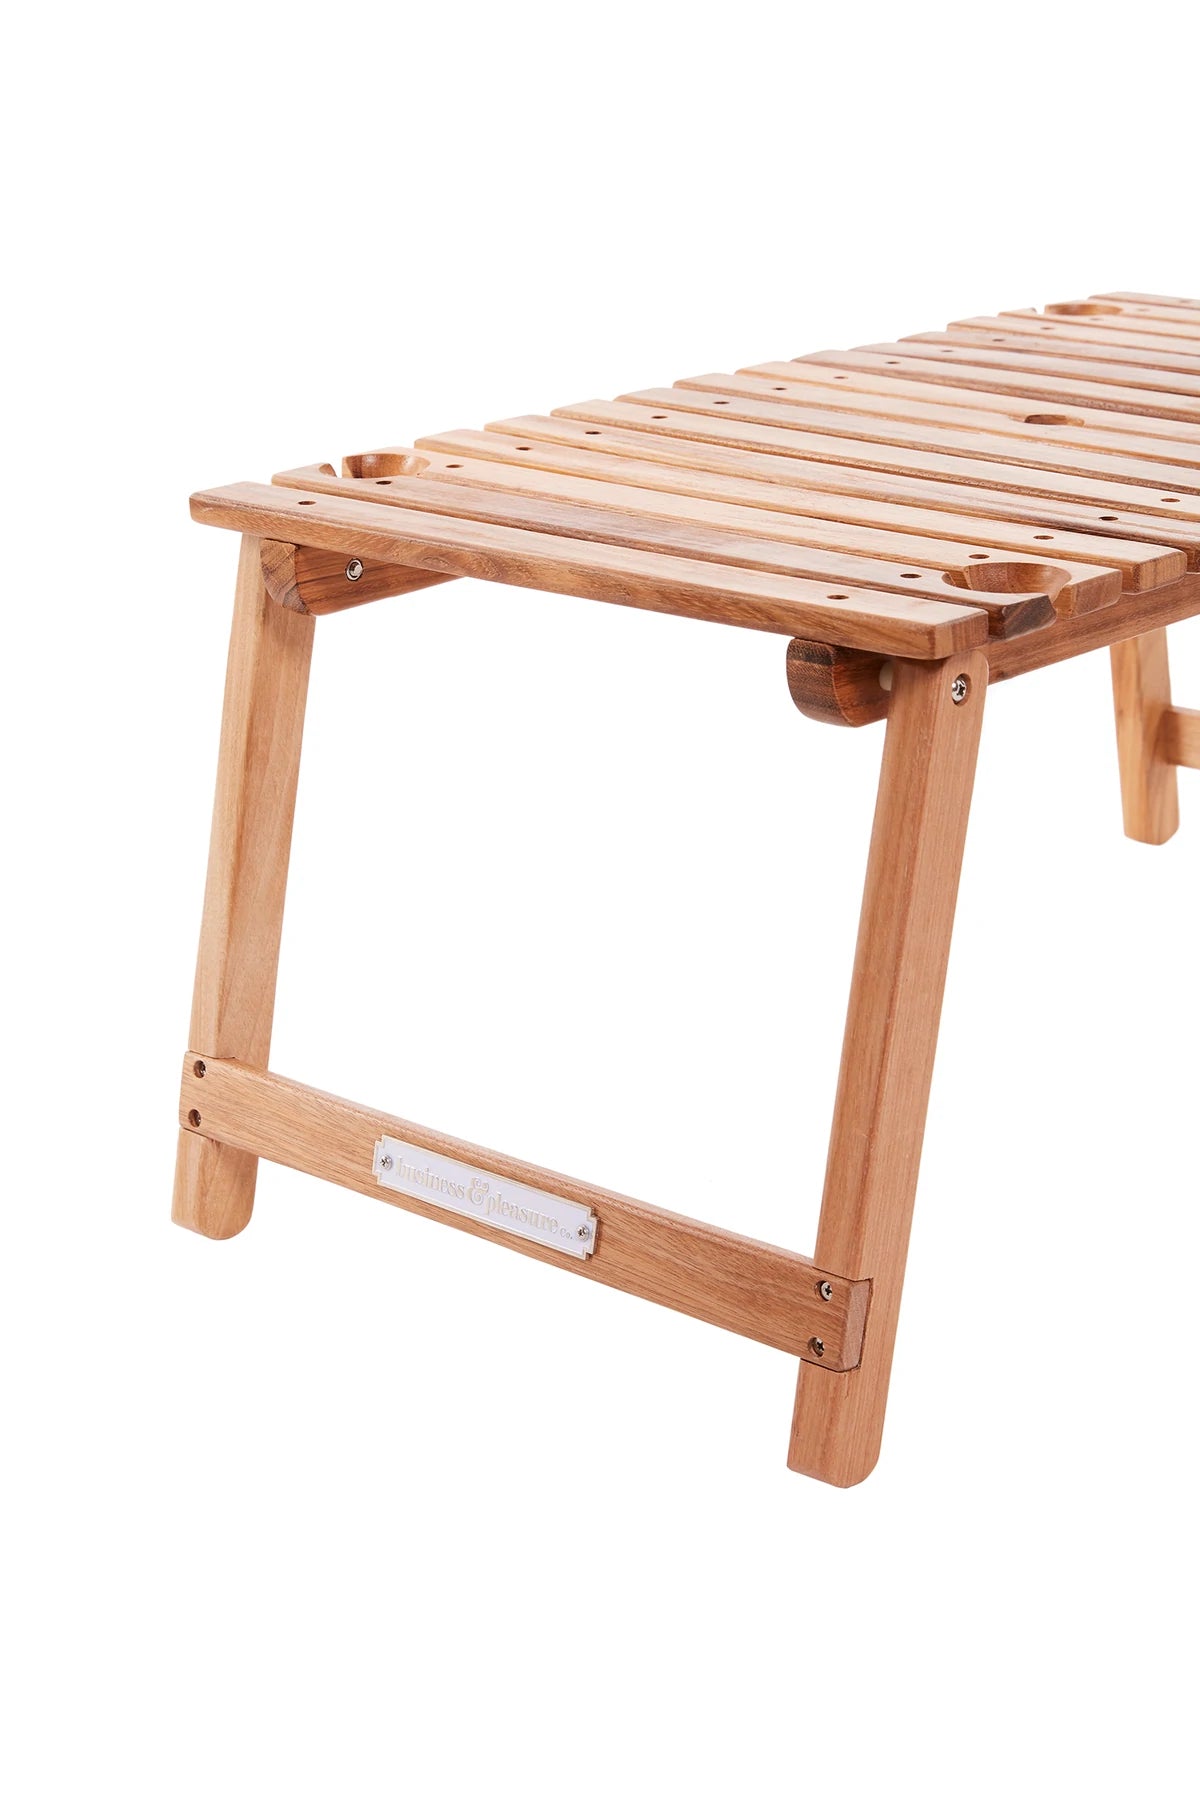 The Folding Table